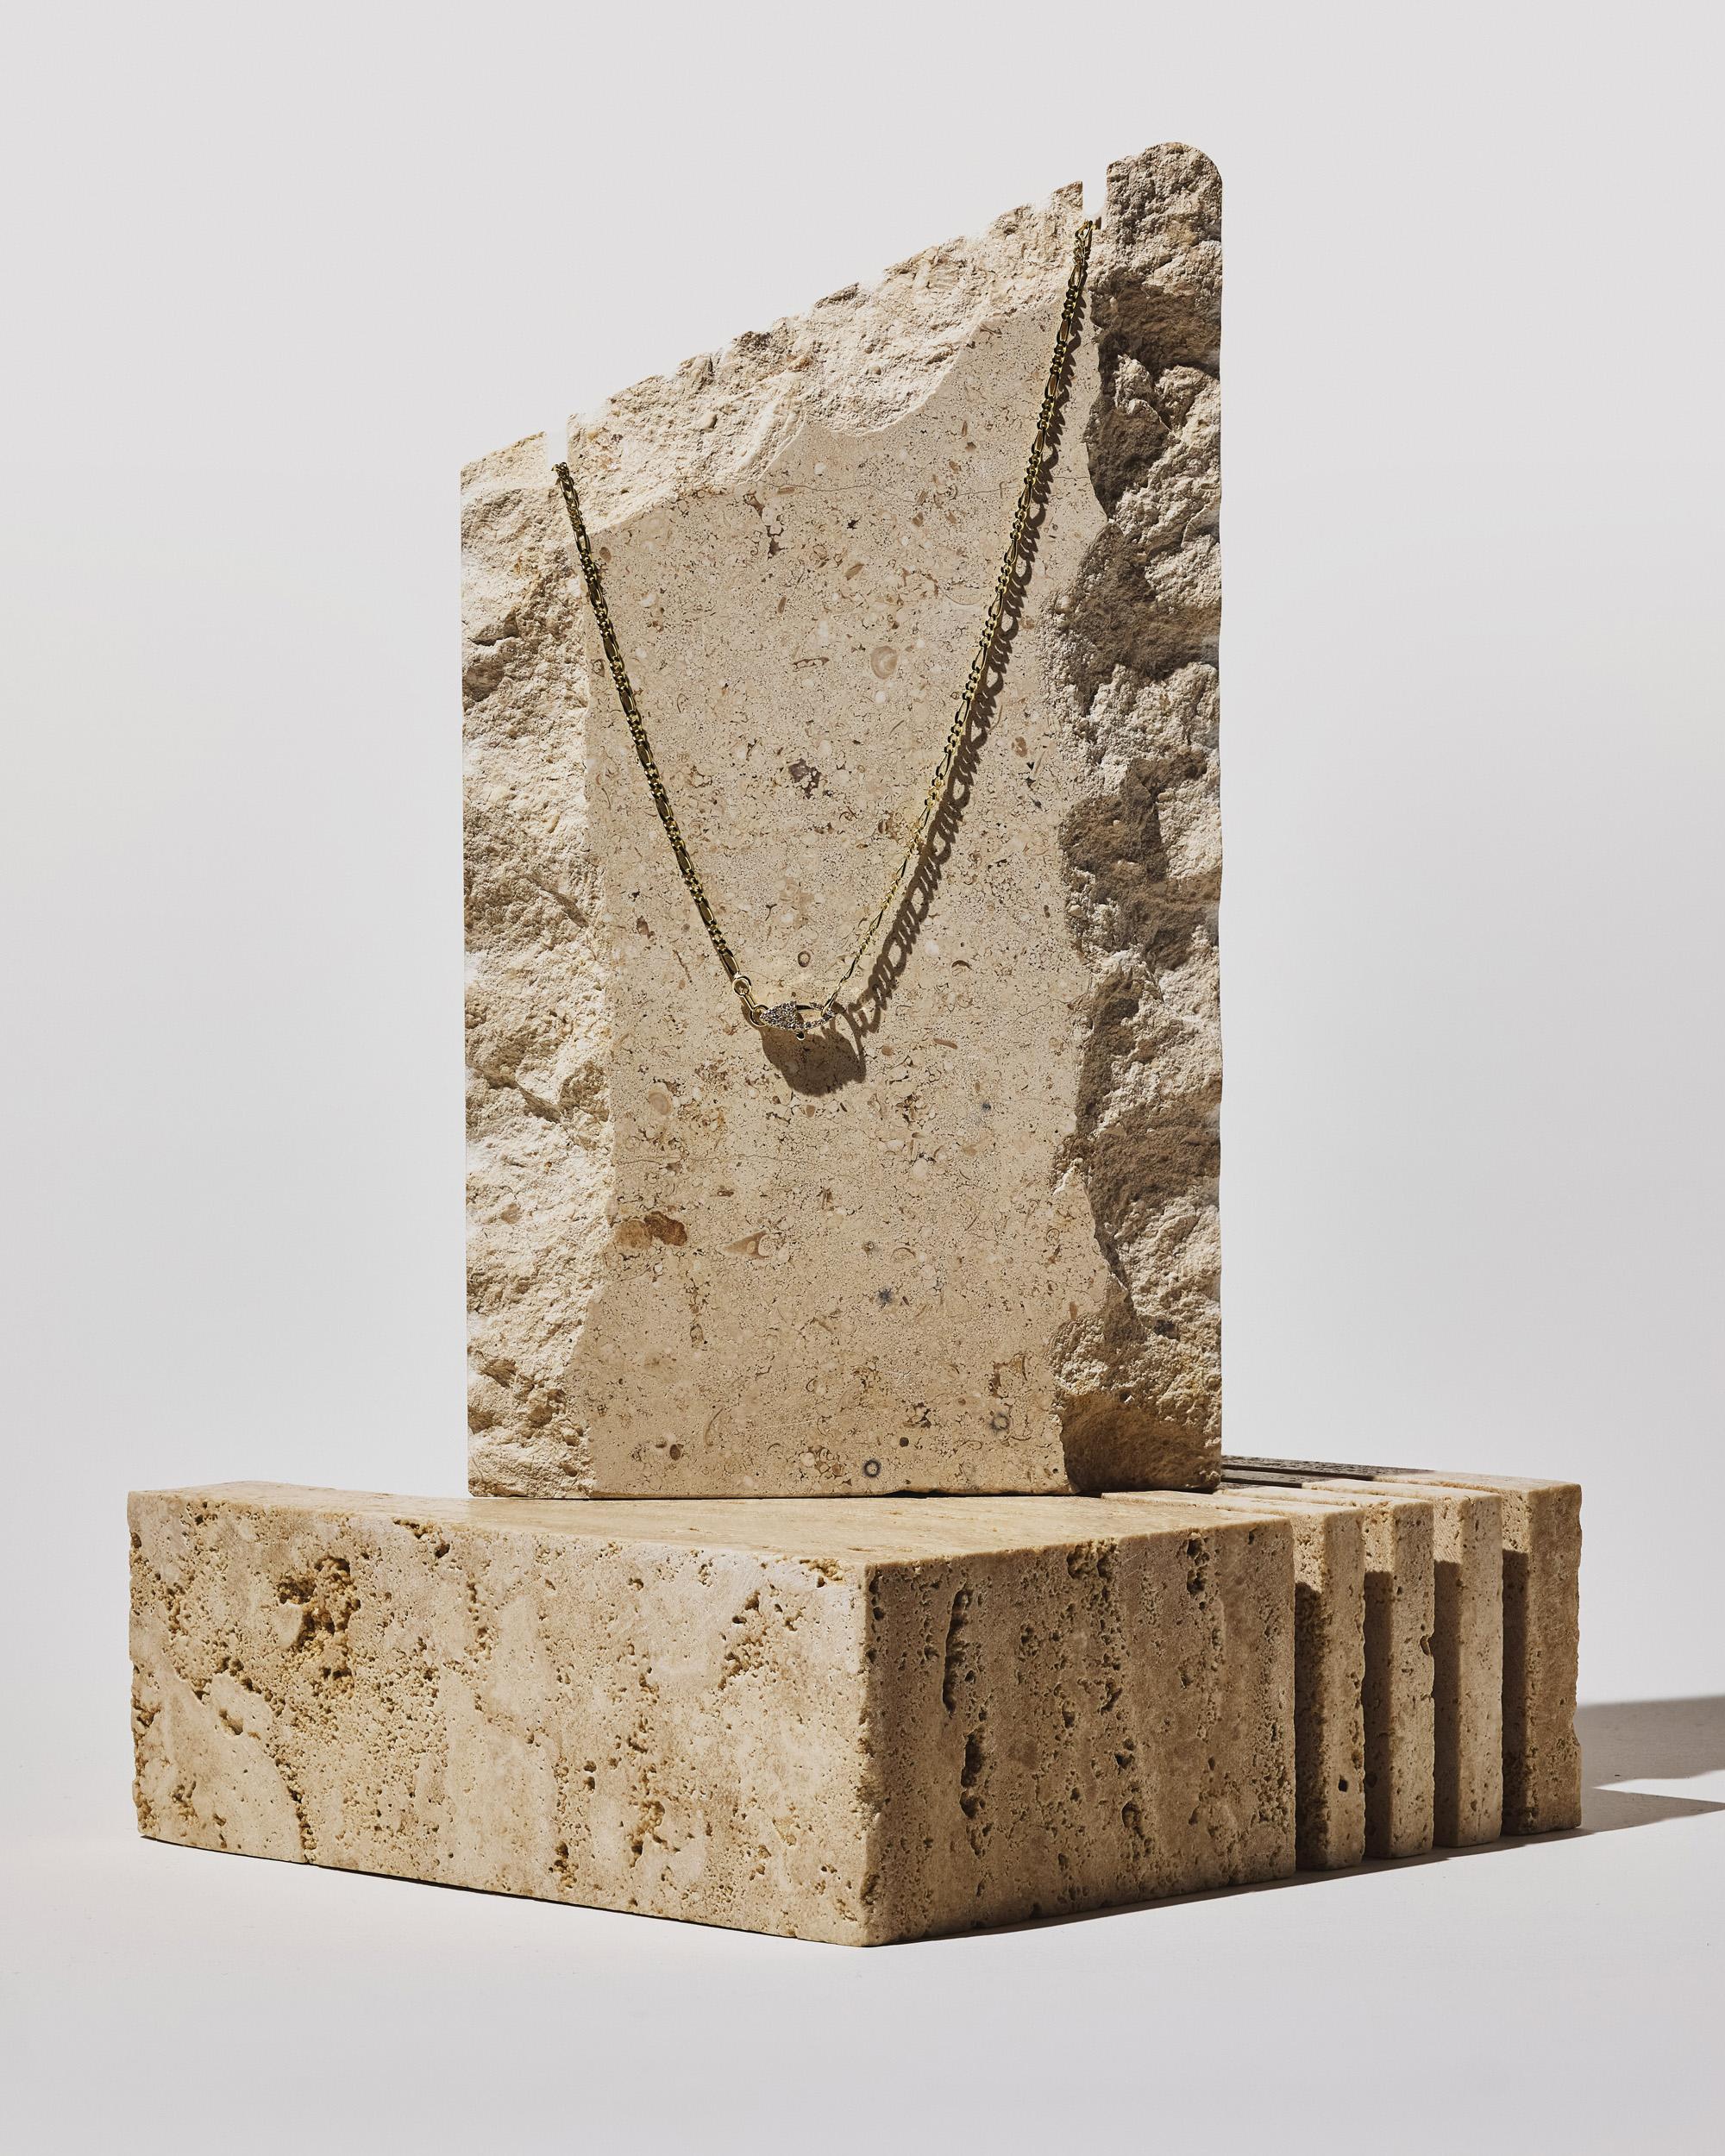 Inspired by lineage jewelry, Series of Eleven celebrates connection through our signature double-sided diamond clasp that shines alongside a variety of eleven solid 14k gold chains.

Embodying everything that truly matters today; sustainability,